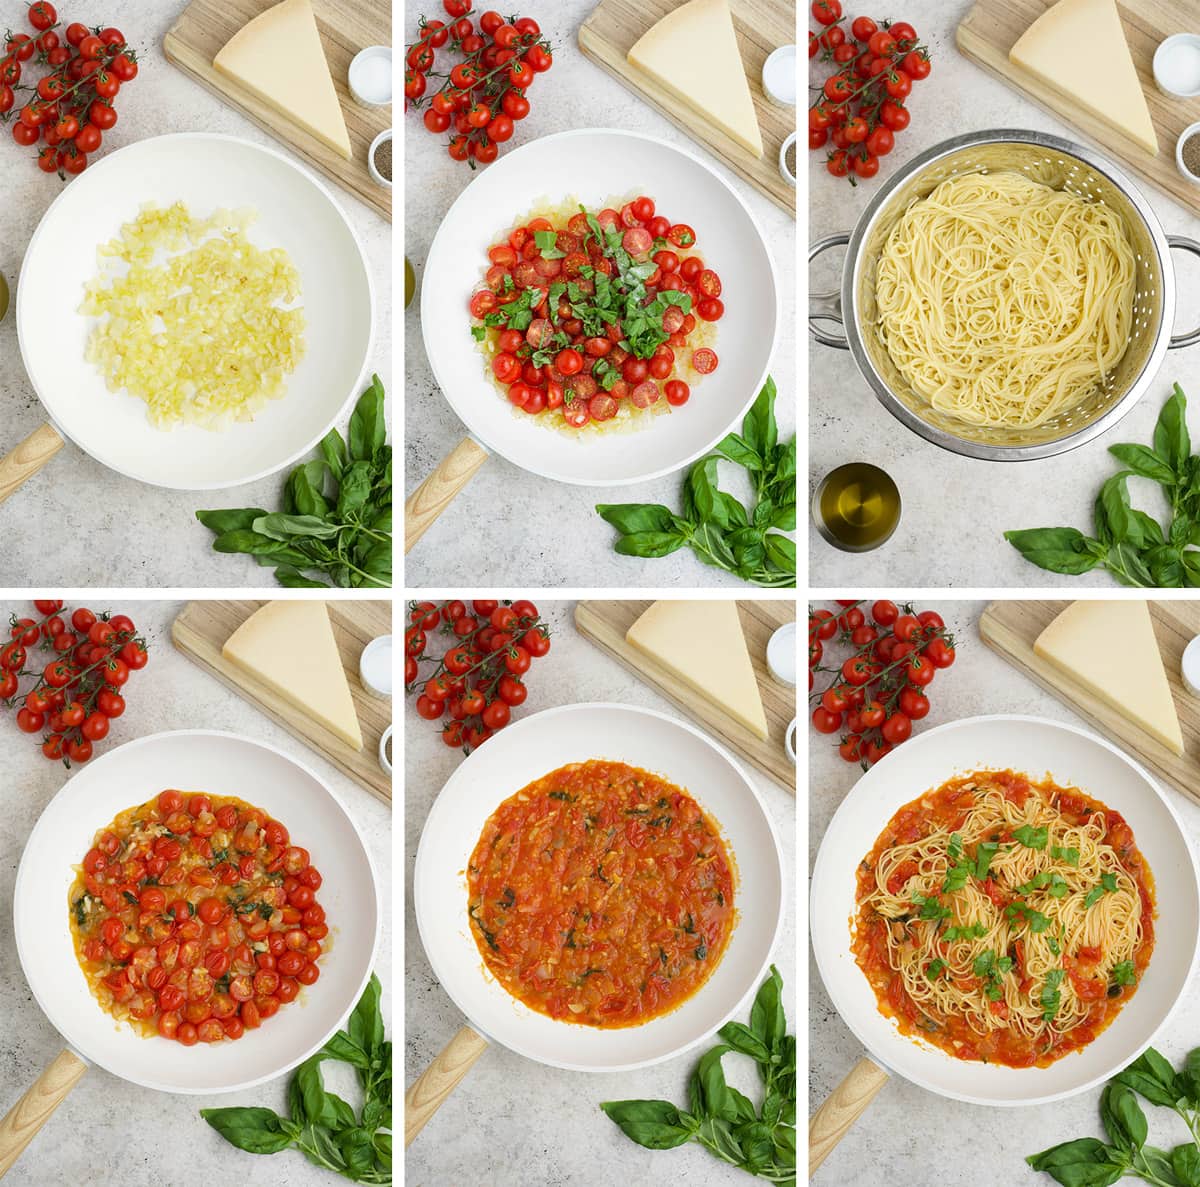 Collage of images showing how to make angel hair pasta with tomatoes.